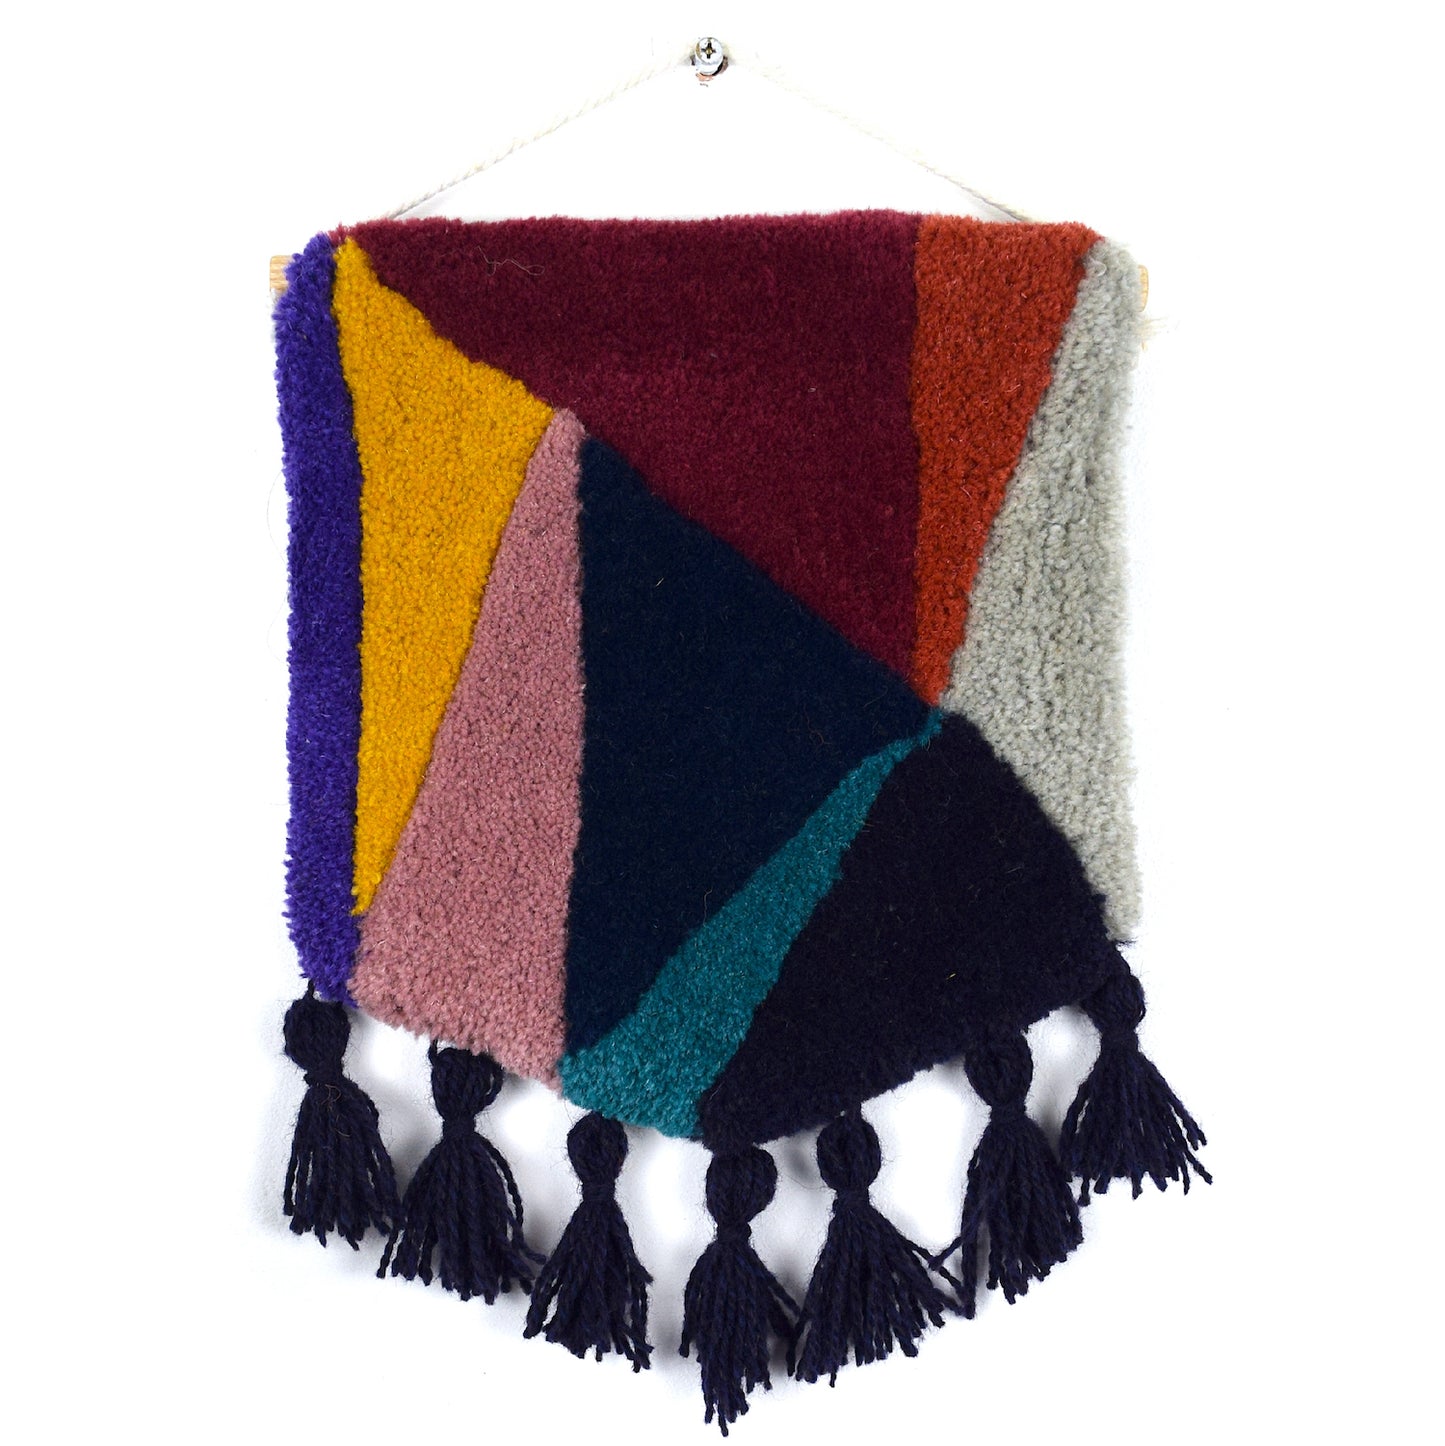 Triangular blocks of colour, the cut pile tuft carved in to pillowy shapes mixing complementary and contrasting Maroon, Coral, Khaki, Aubergine, Turquoise, Navy, Lilac, Mustard and Purple Reclaimed Yarn, with Aubergine tassels.